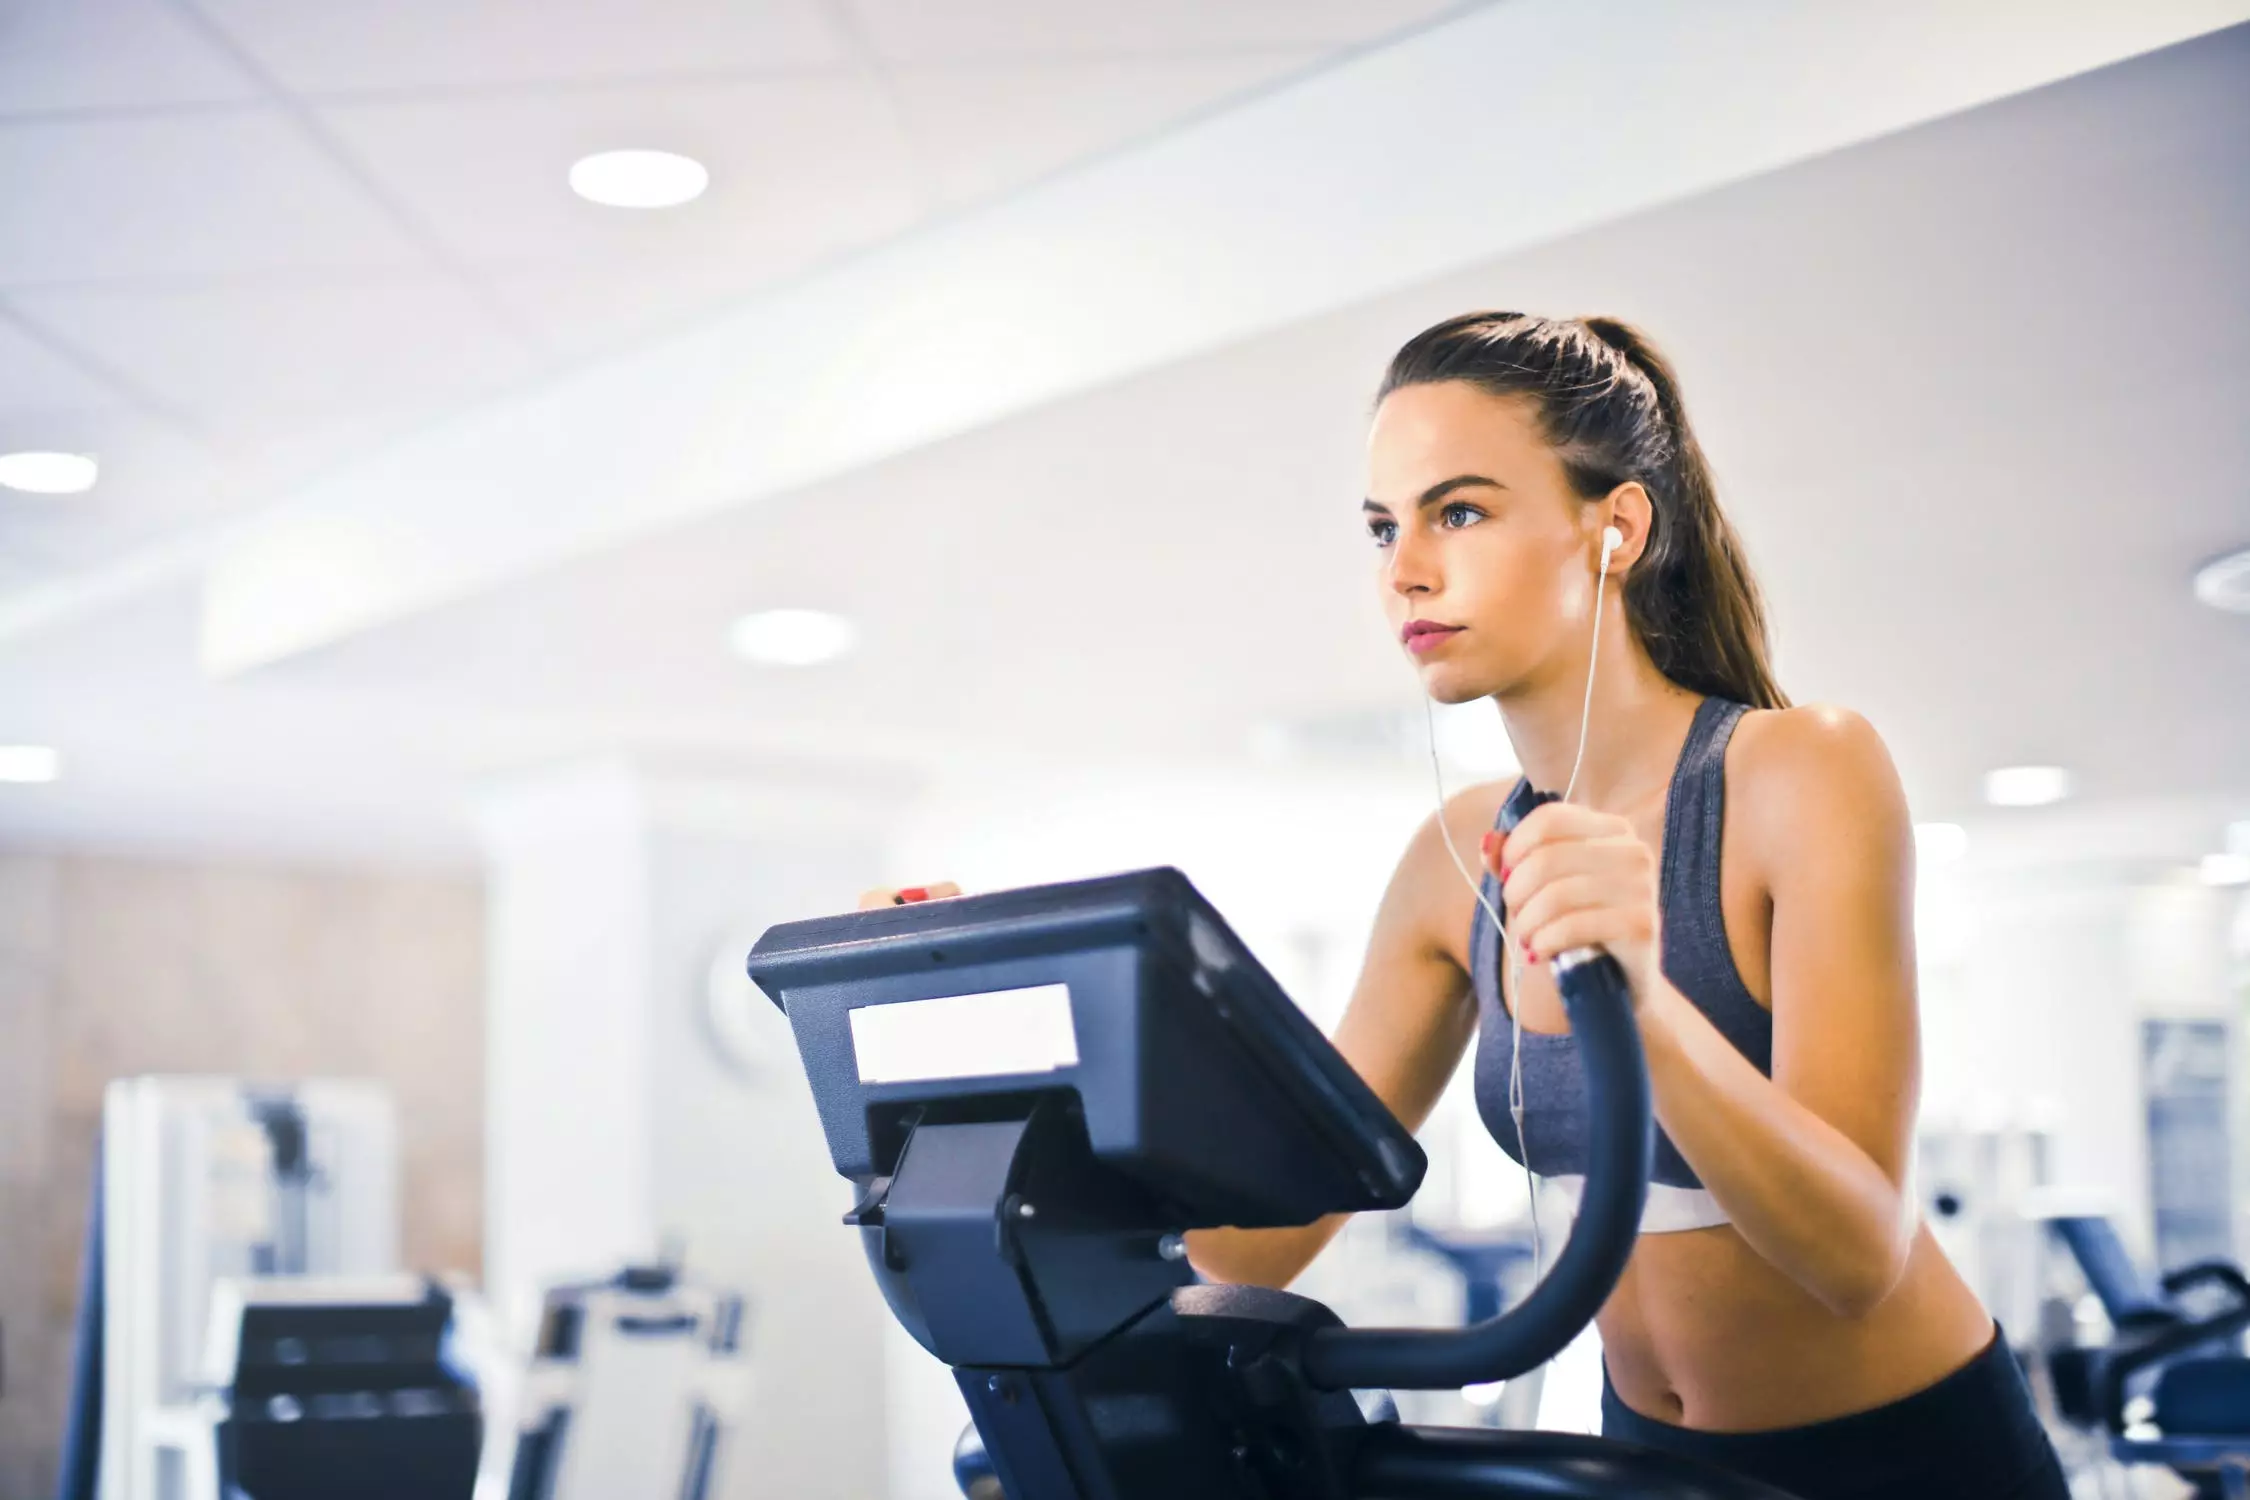 Women up and down the country have been desperate to get back in the gym (